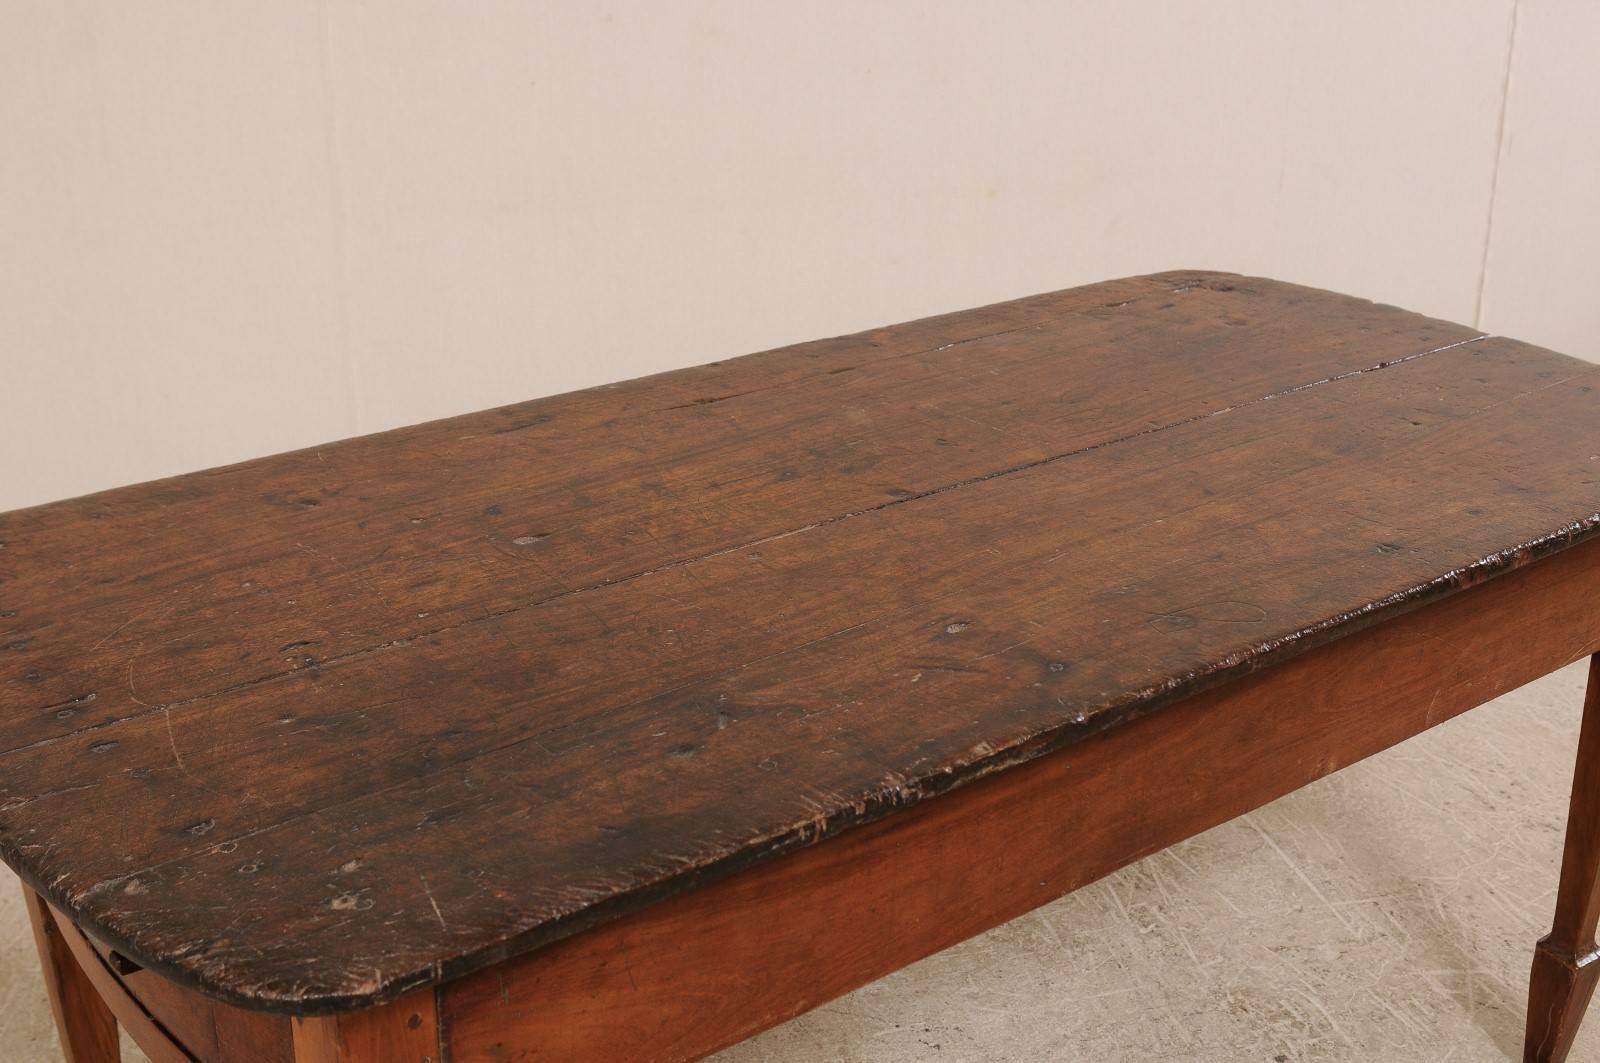 Early 20th Century Brazilian Peroba Wood Table with Two Drawers and Spaded Feet 2